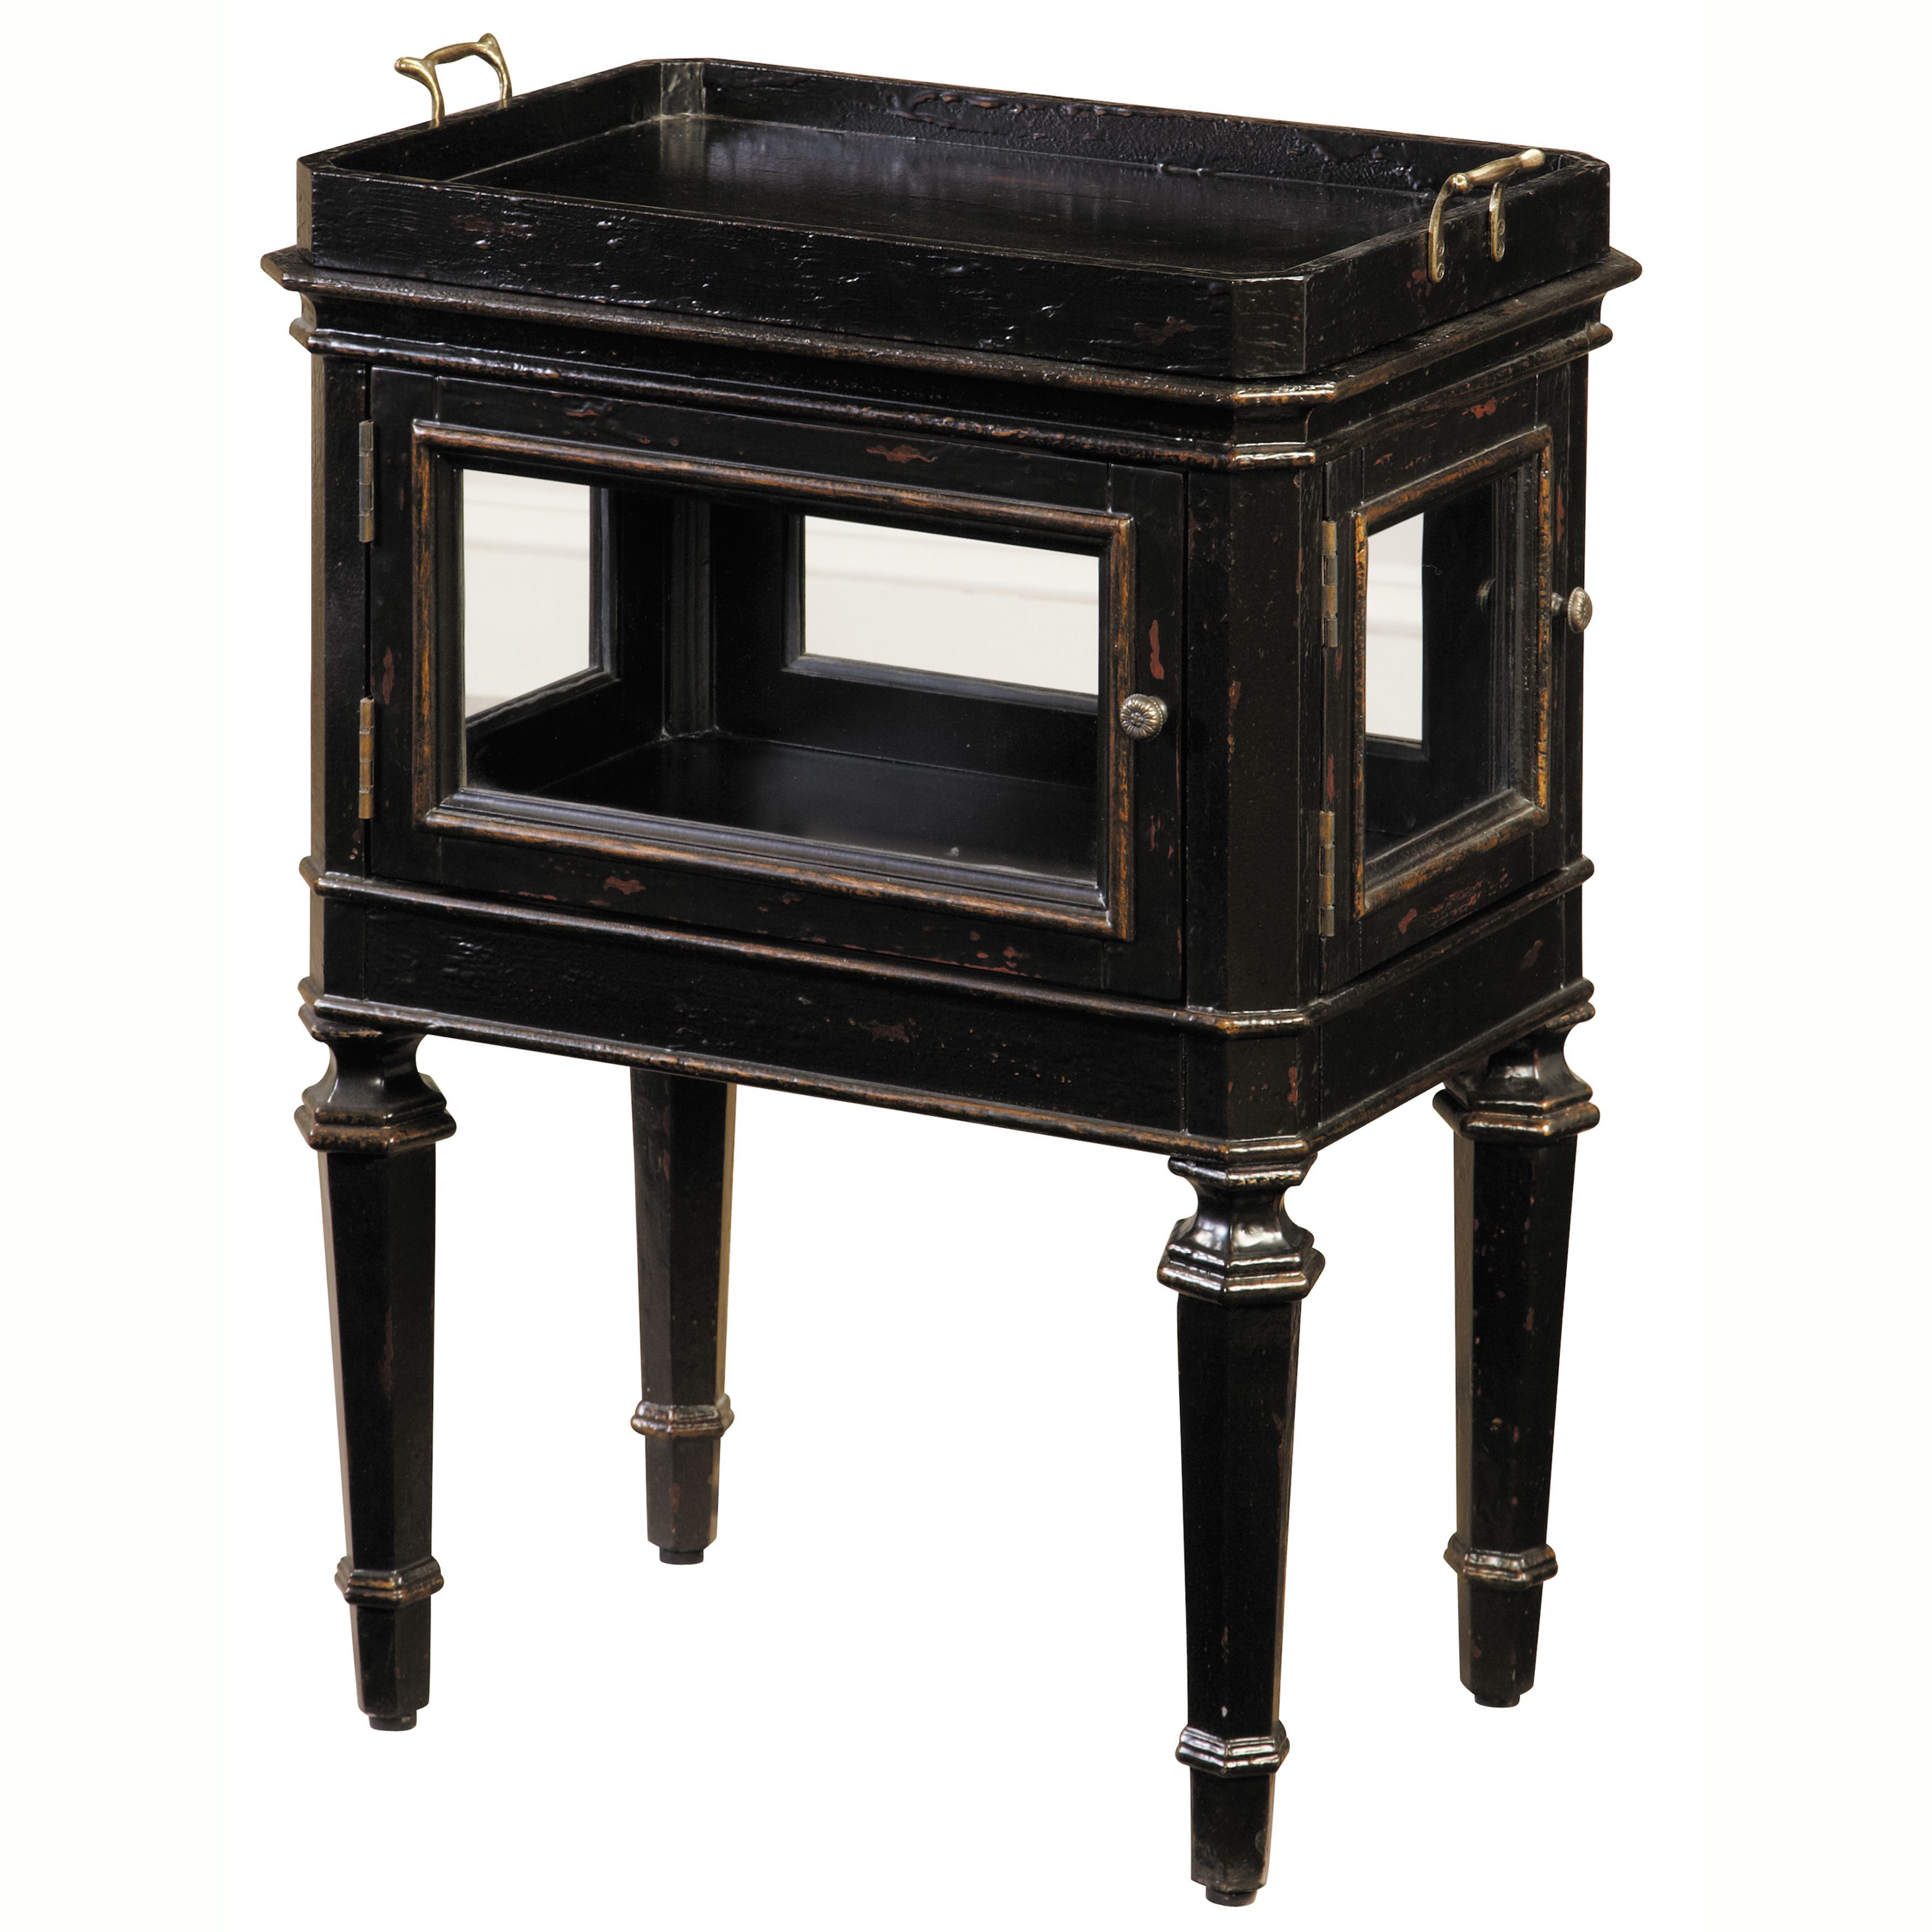 this hand painted distressed black finish accent table features two functional glass doors and removable lift off try top the offers elegant decorative accessories side chairs